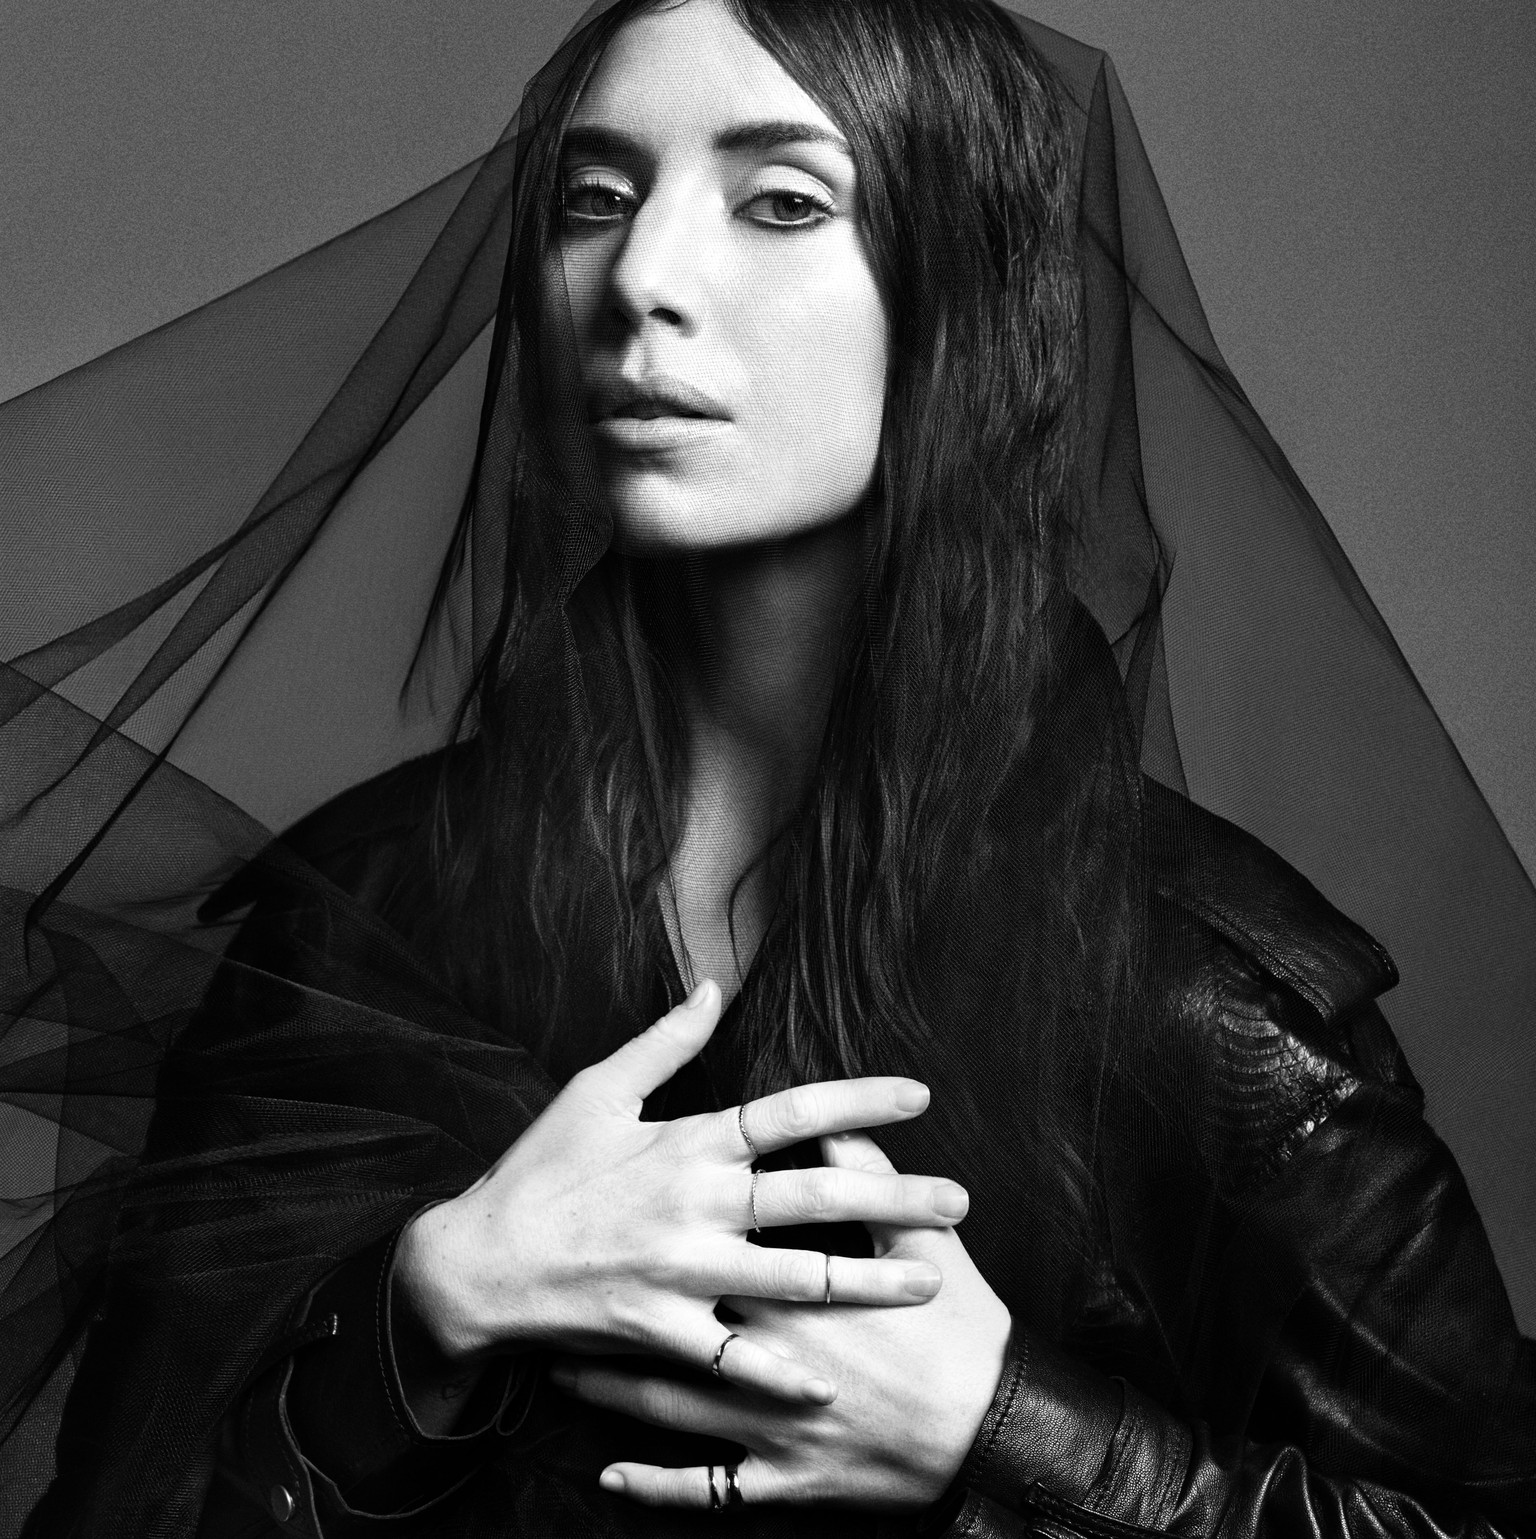 This CD cover image released by Atlantic Records shows &quot;I Never Learn,&quot; a release by Lykke Li. (AP Photo/Atlantic Records)